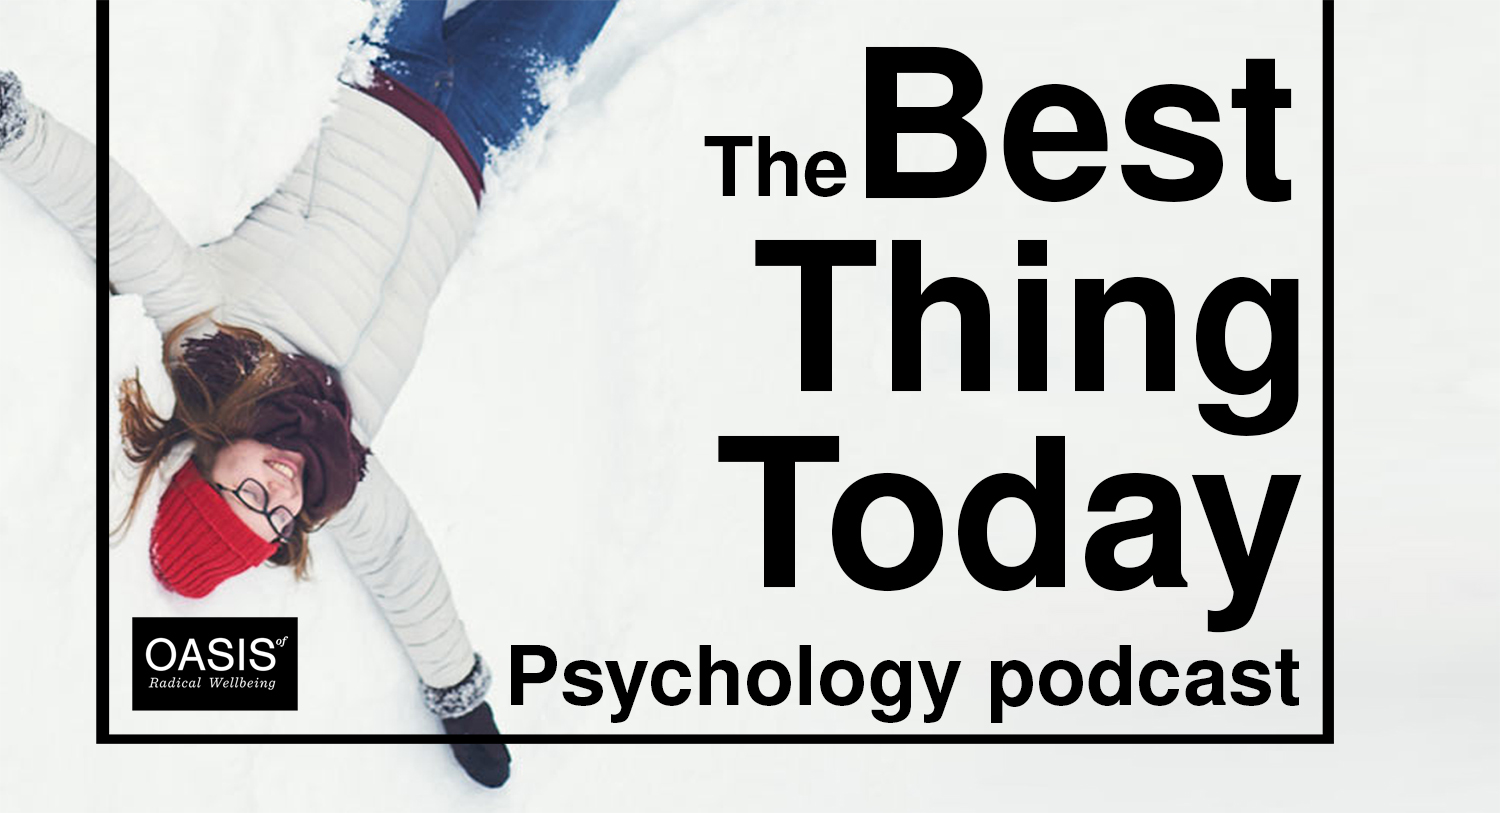 The Best Thing Today. Psychology podcast from Aalto University